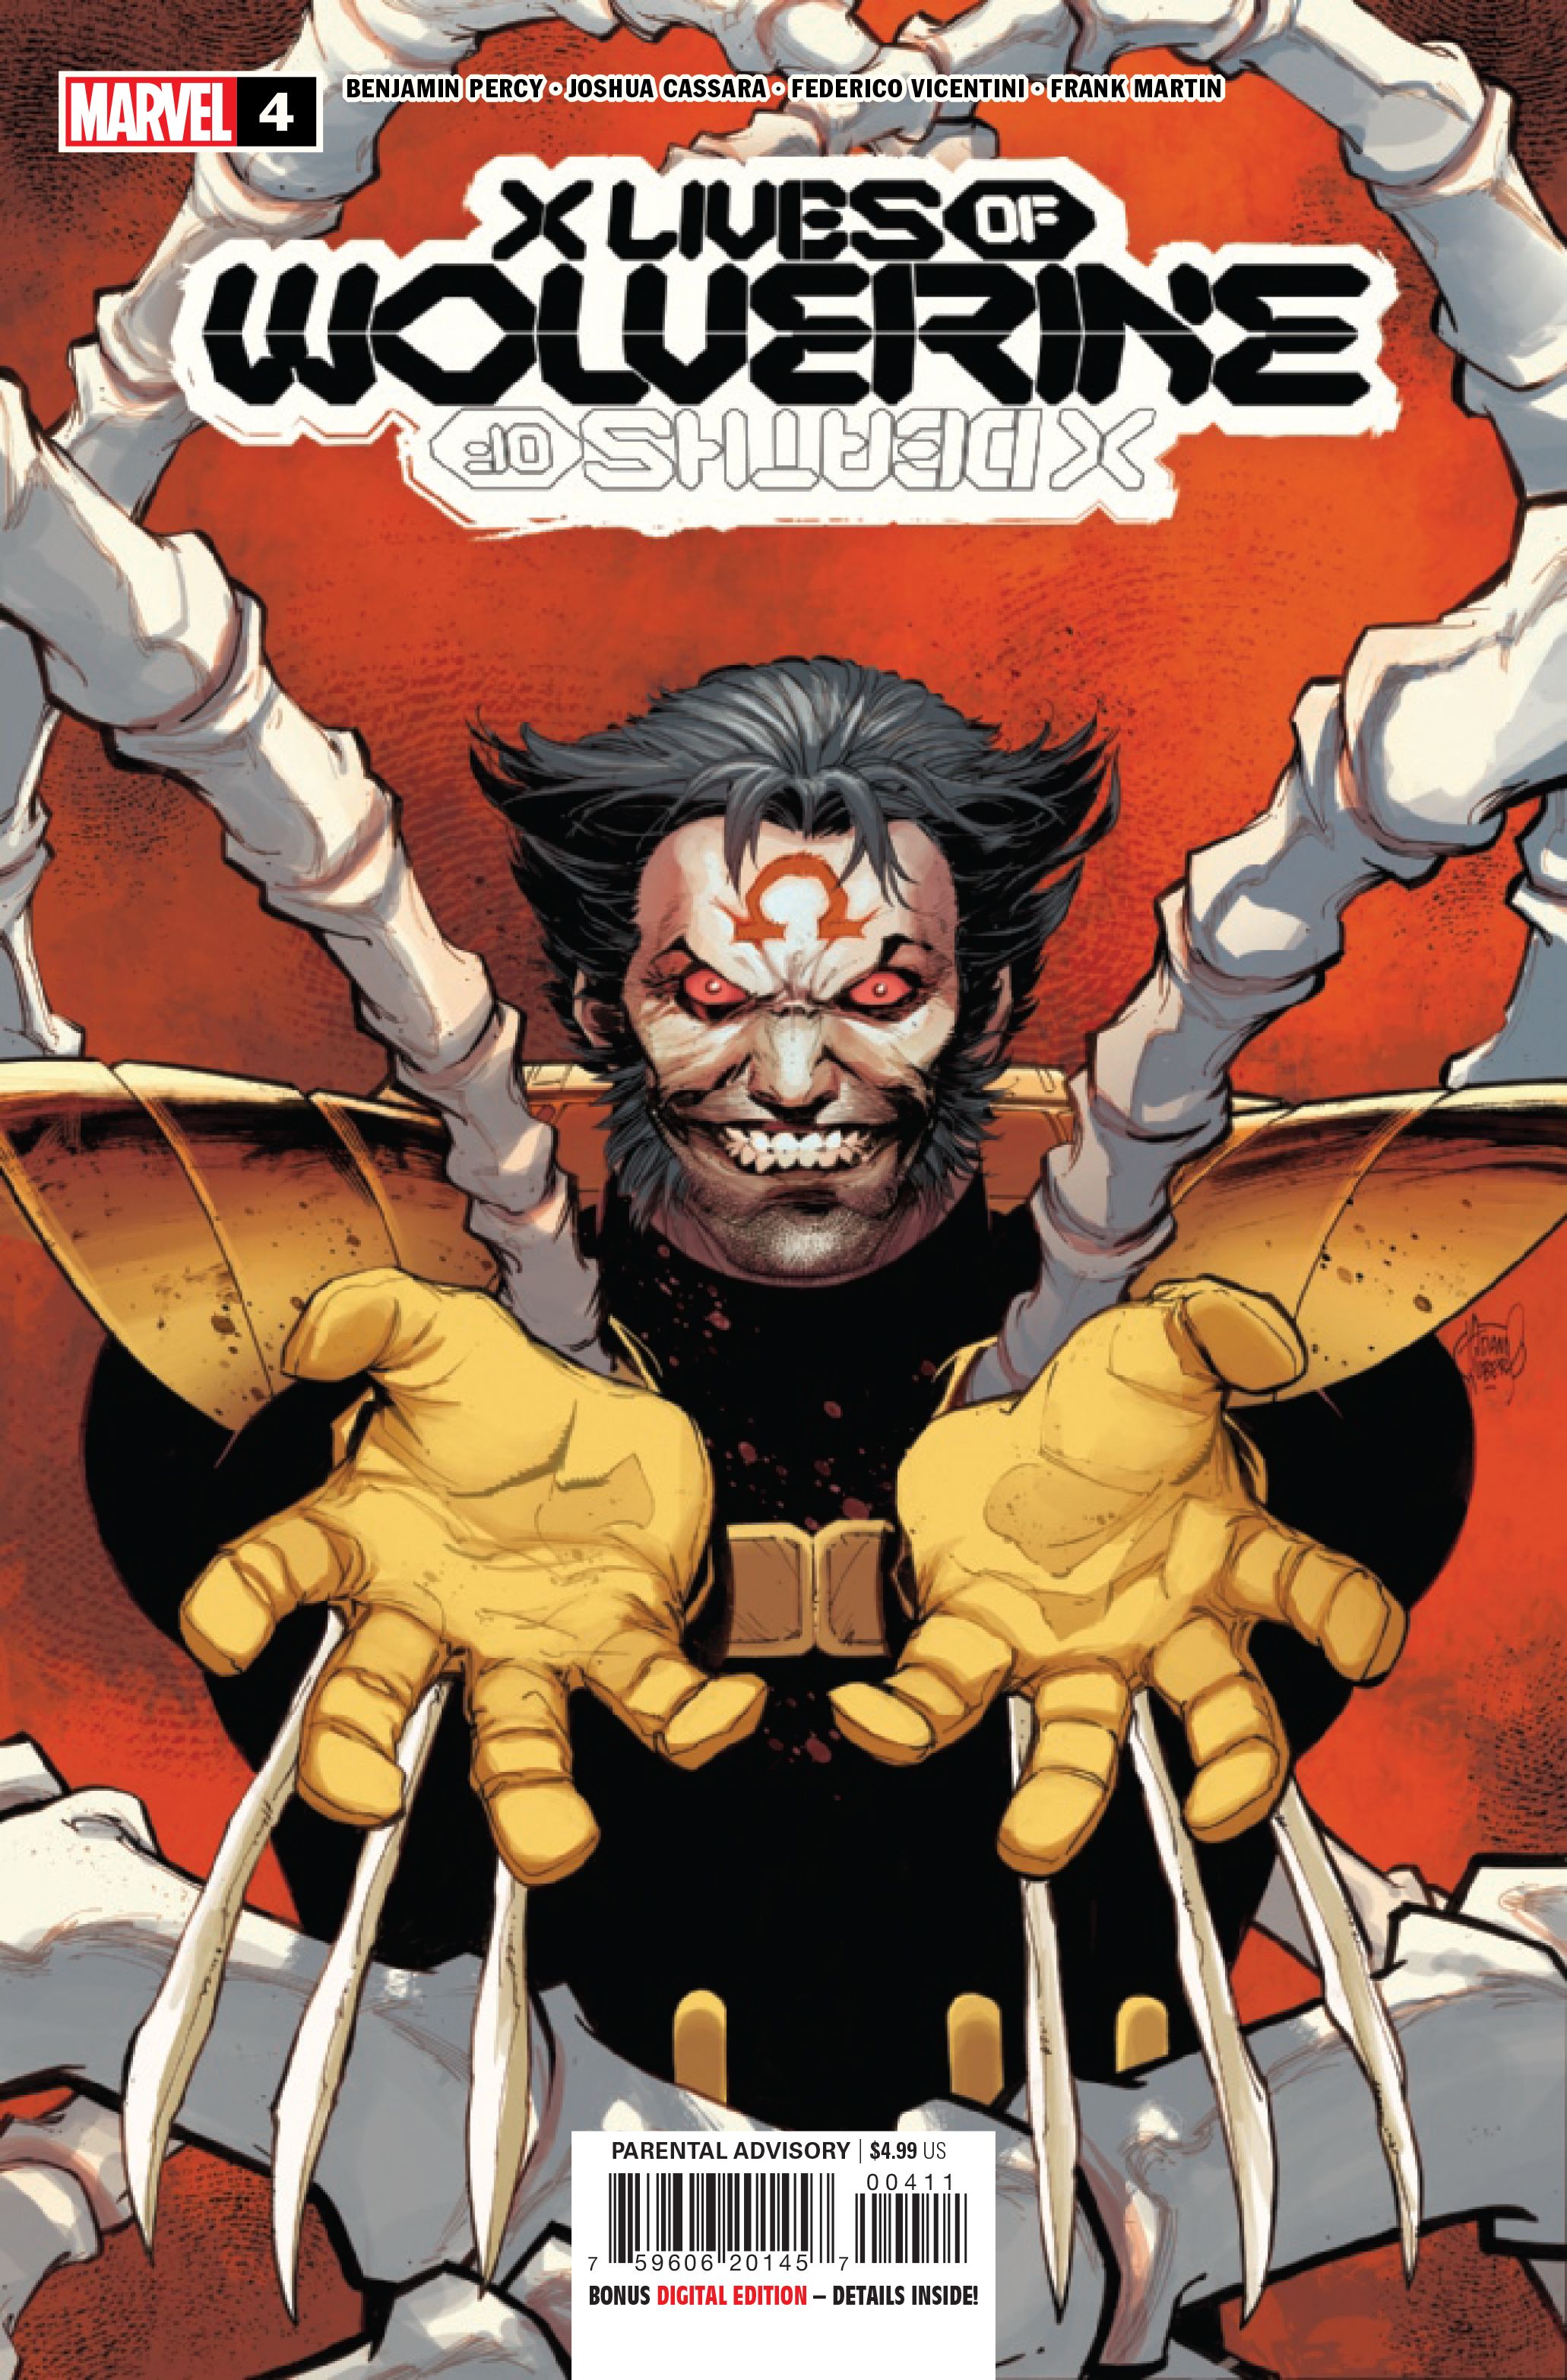 Cover for X Lives of Wolverine #4